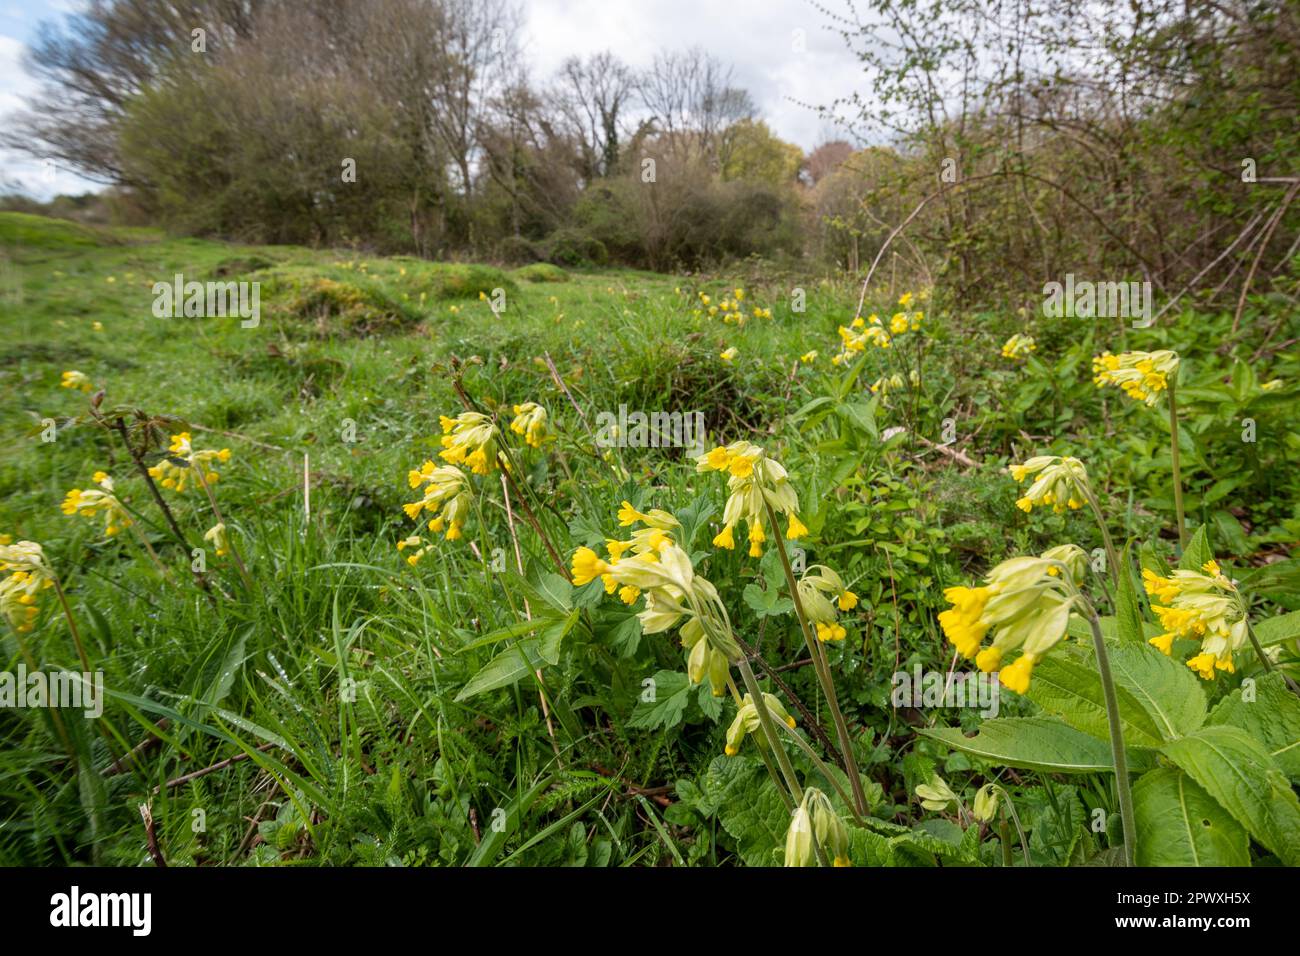 Cowslips (Primula veris), yellow wildflowers on Noar Hill SSSI, Selborne, Hampshire, England, UK, in late April or spring Stock Photo